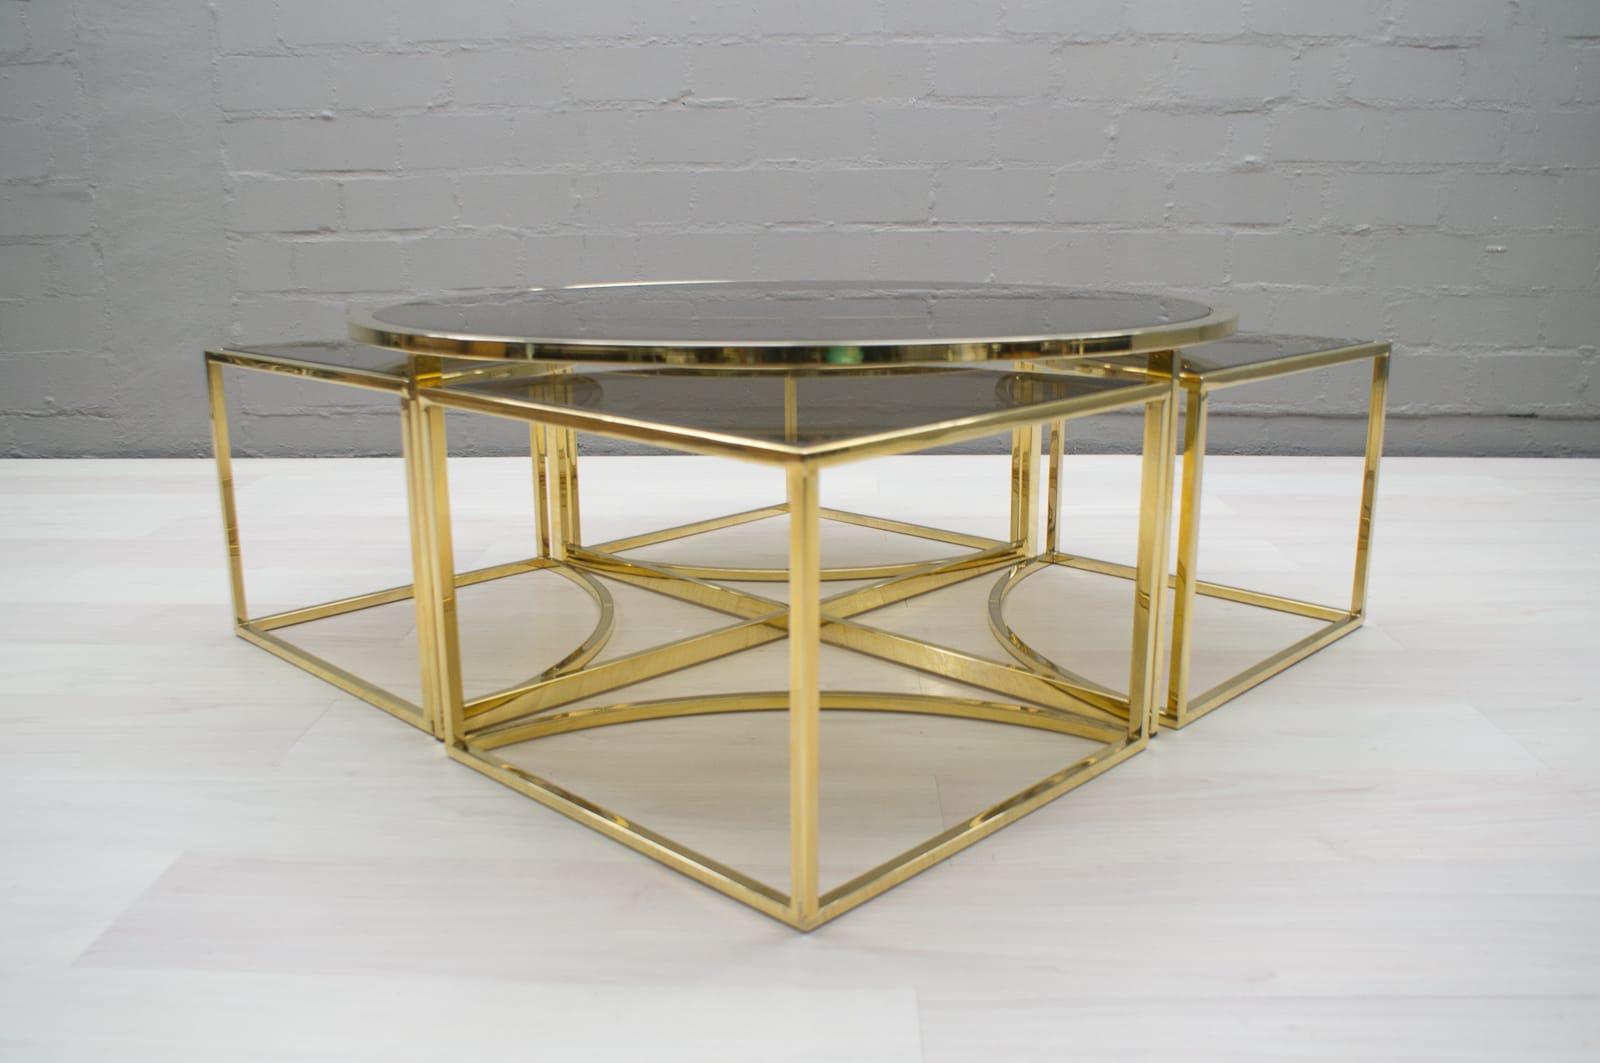 A very decorative coffee table with four side tables that can be placed underneath. 

Elegant and noble looking. 

Many different positions possible. See pictures. 

Very good condition with light wear consistent with age and use.